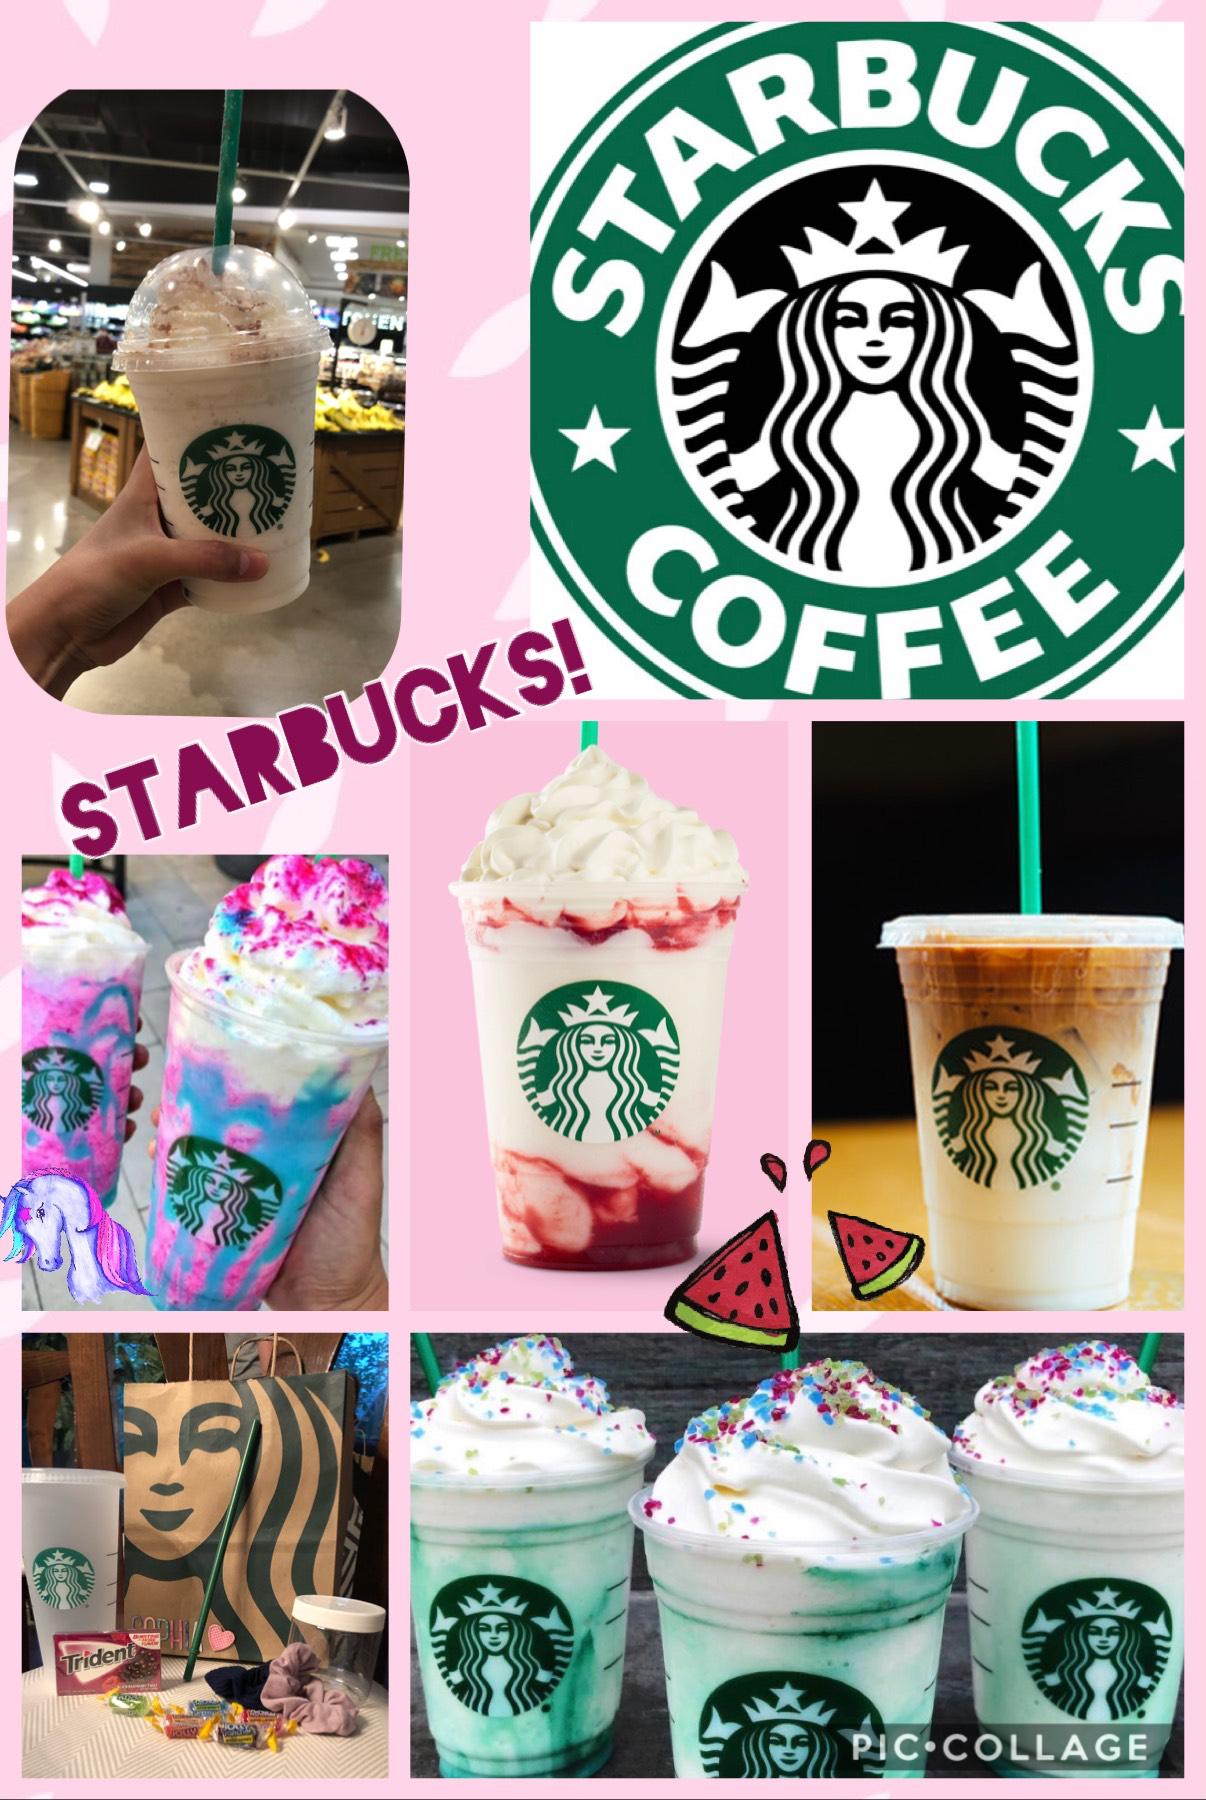 Starbucks! What’s your favorite drink? 